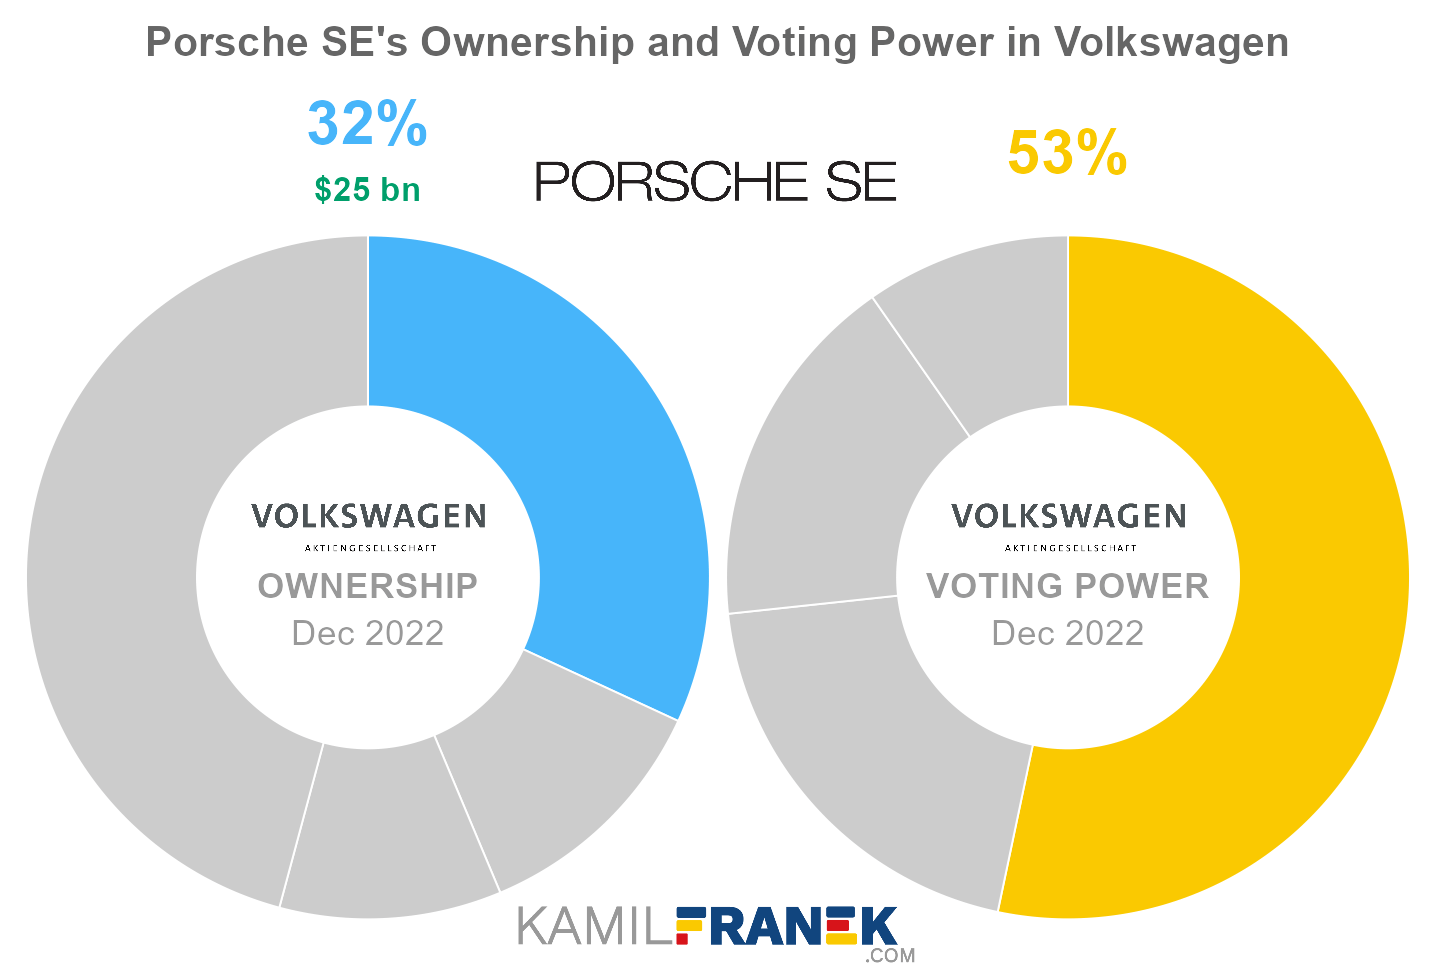 Porsche SE's share ownership and voting power in Volkswagen (chart)